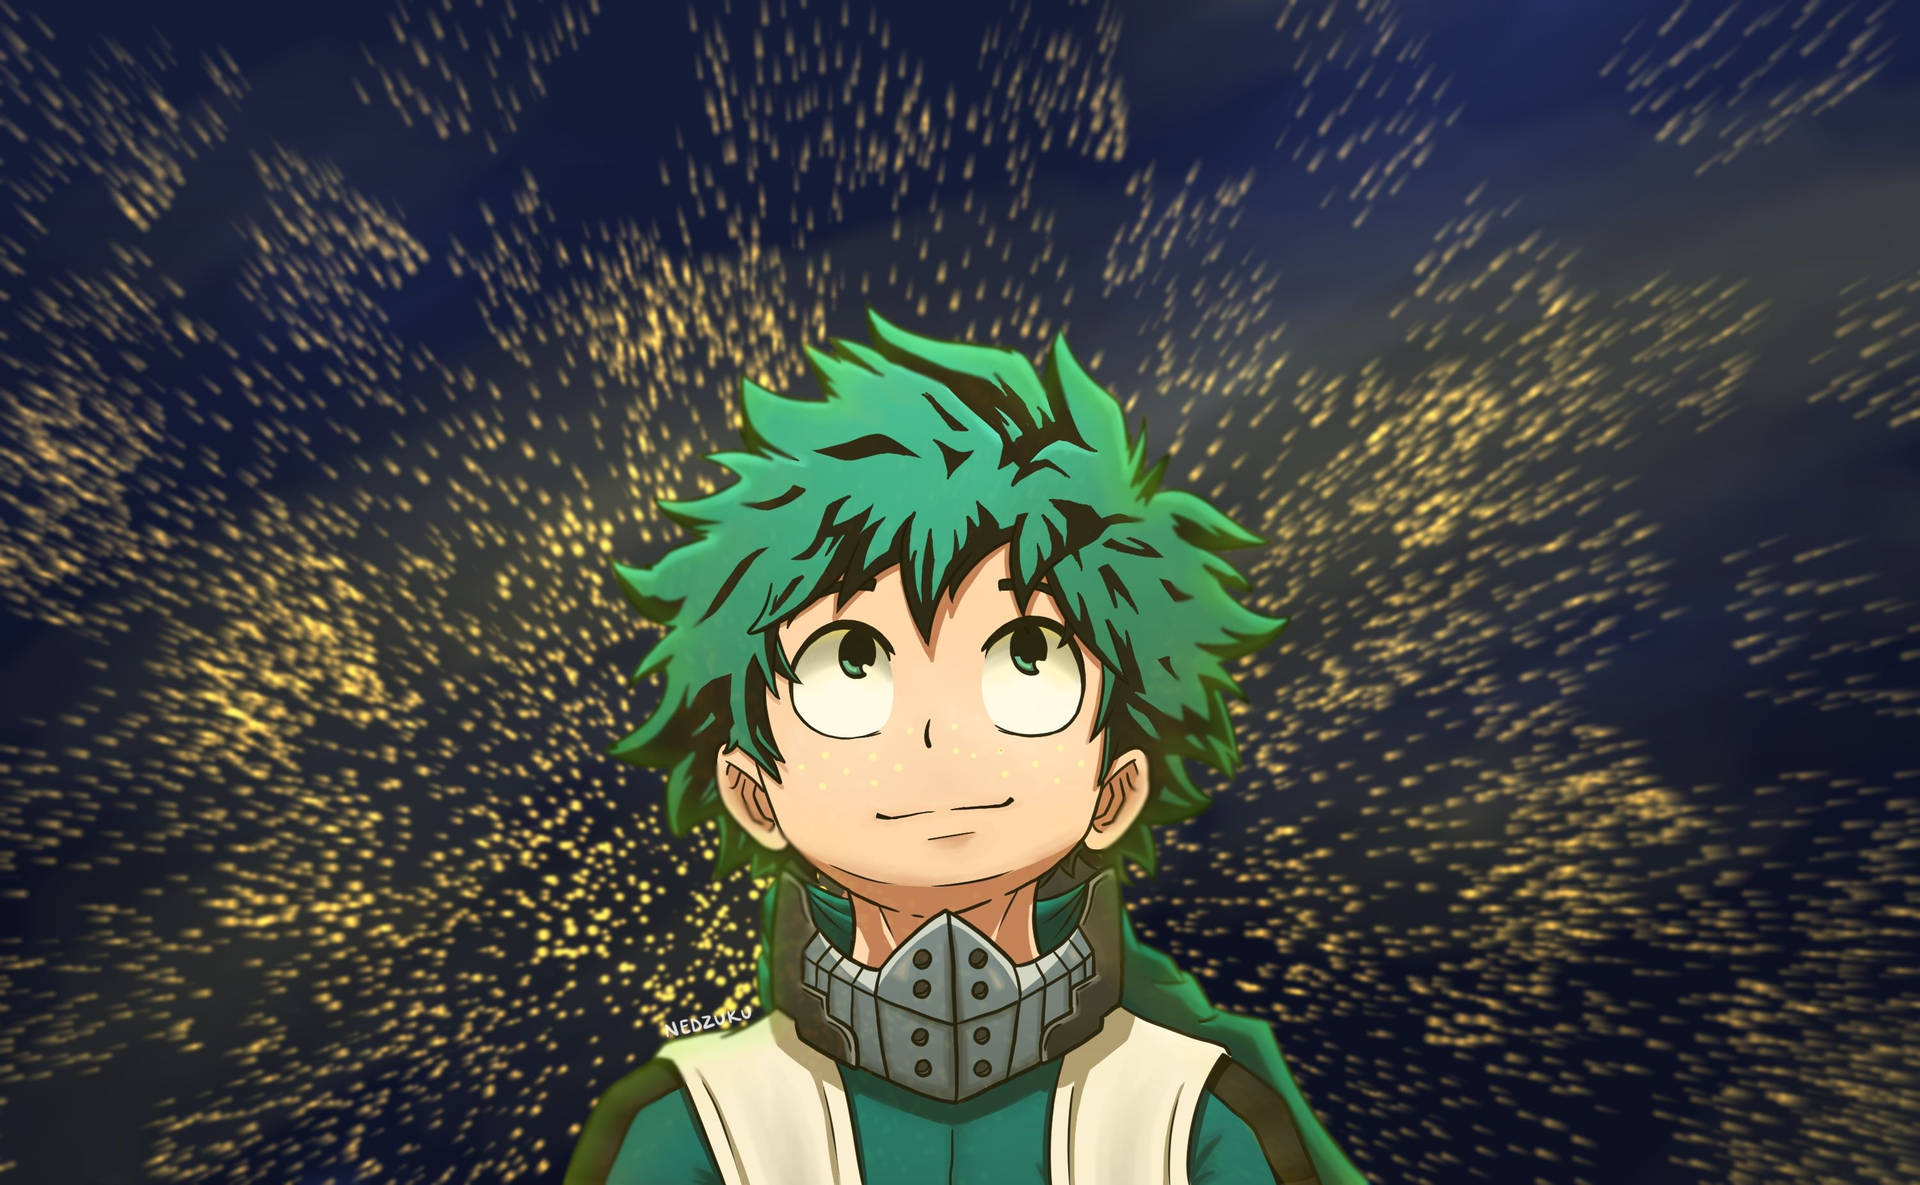 Deku looks in awe at the bright yellow sparkles Wallpaper